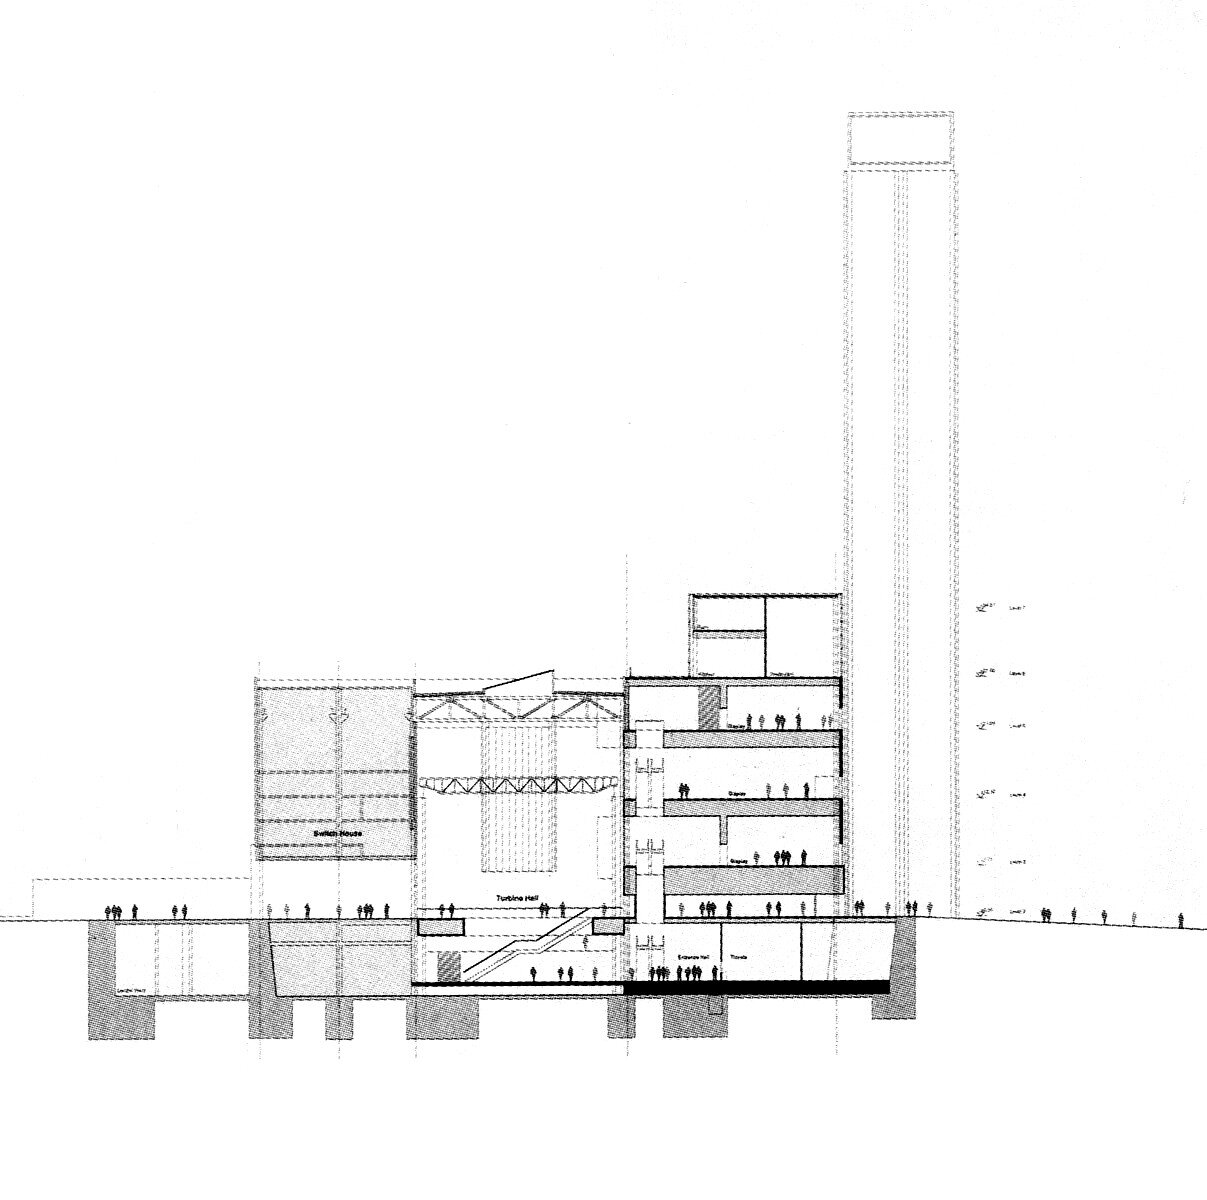 Tate_Modern_Section_through_Tower_Concours.jpg